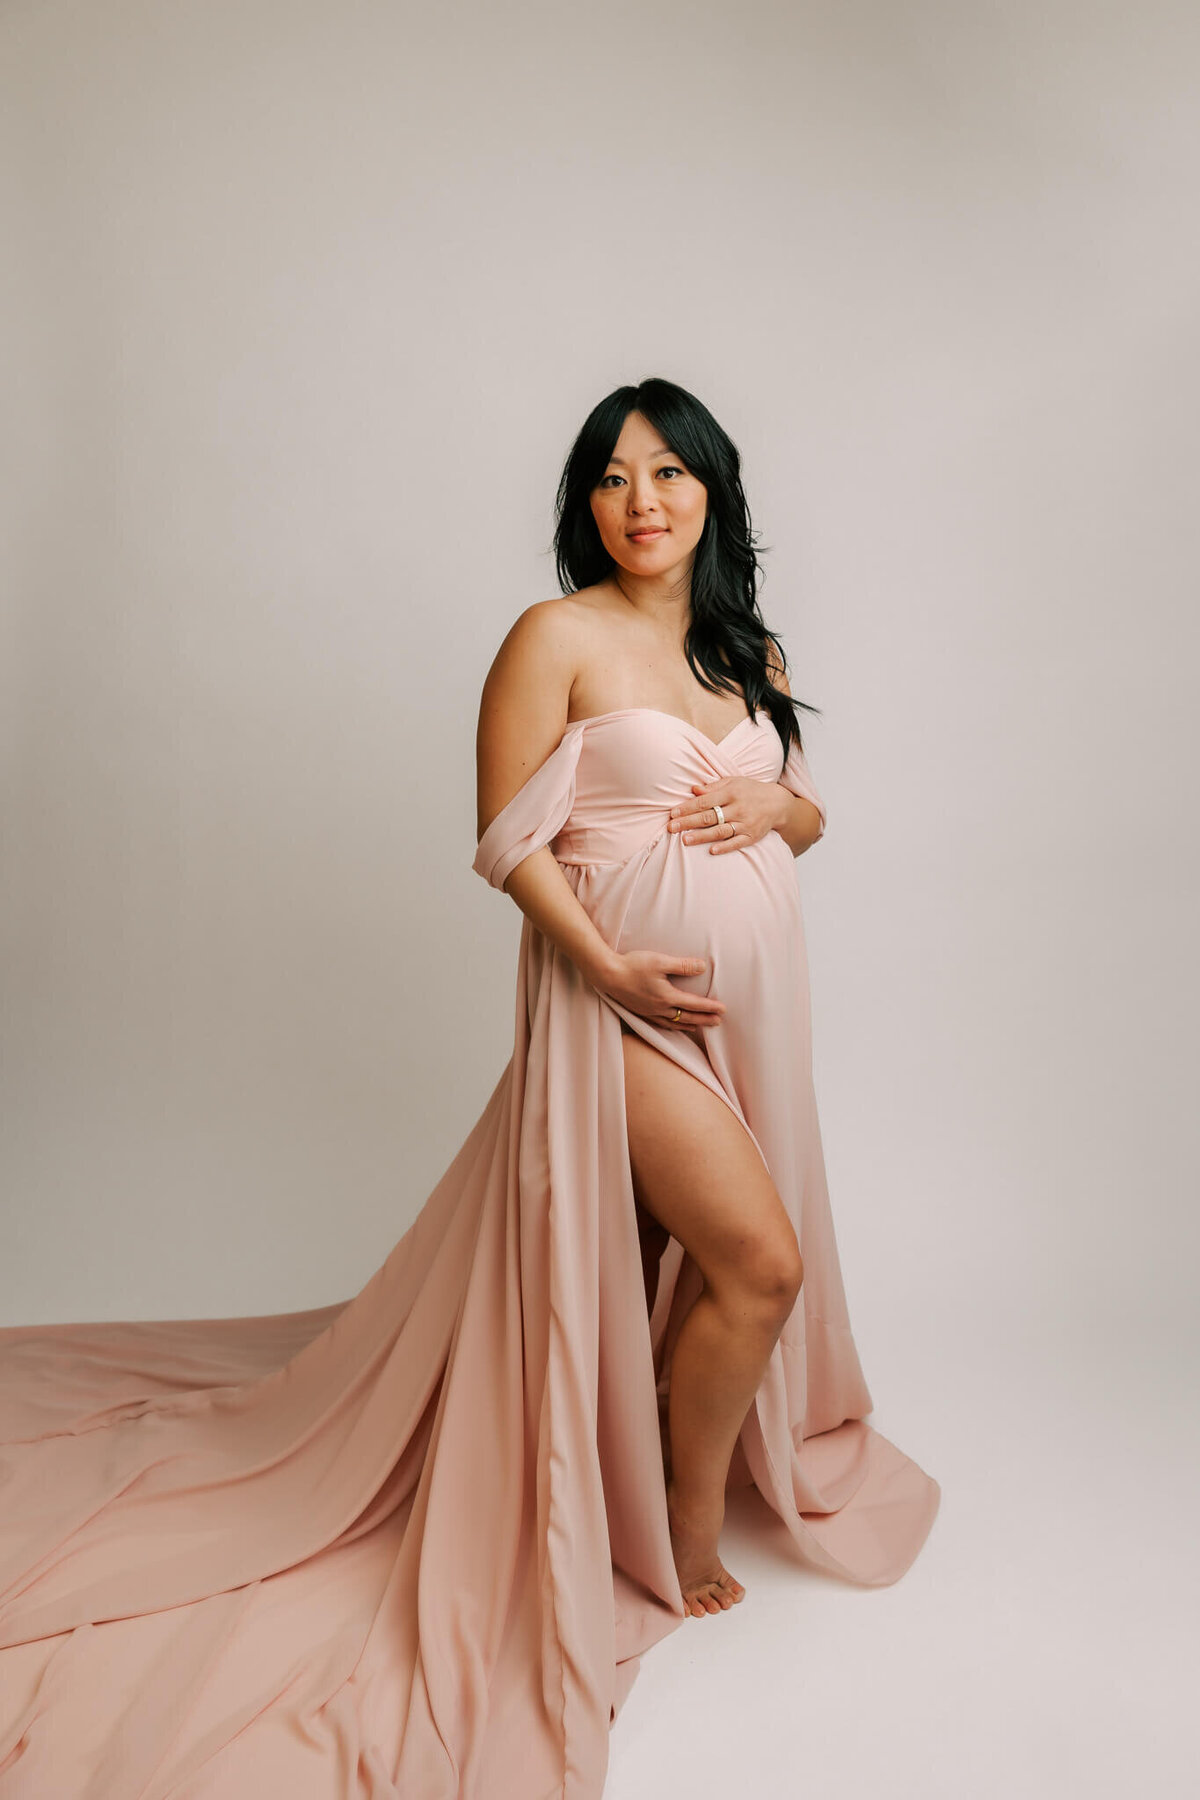 studio maternity portrait of a mom wearing a pink dress and smiling at the camera with her hangs on her belly